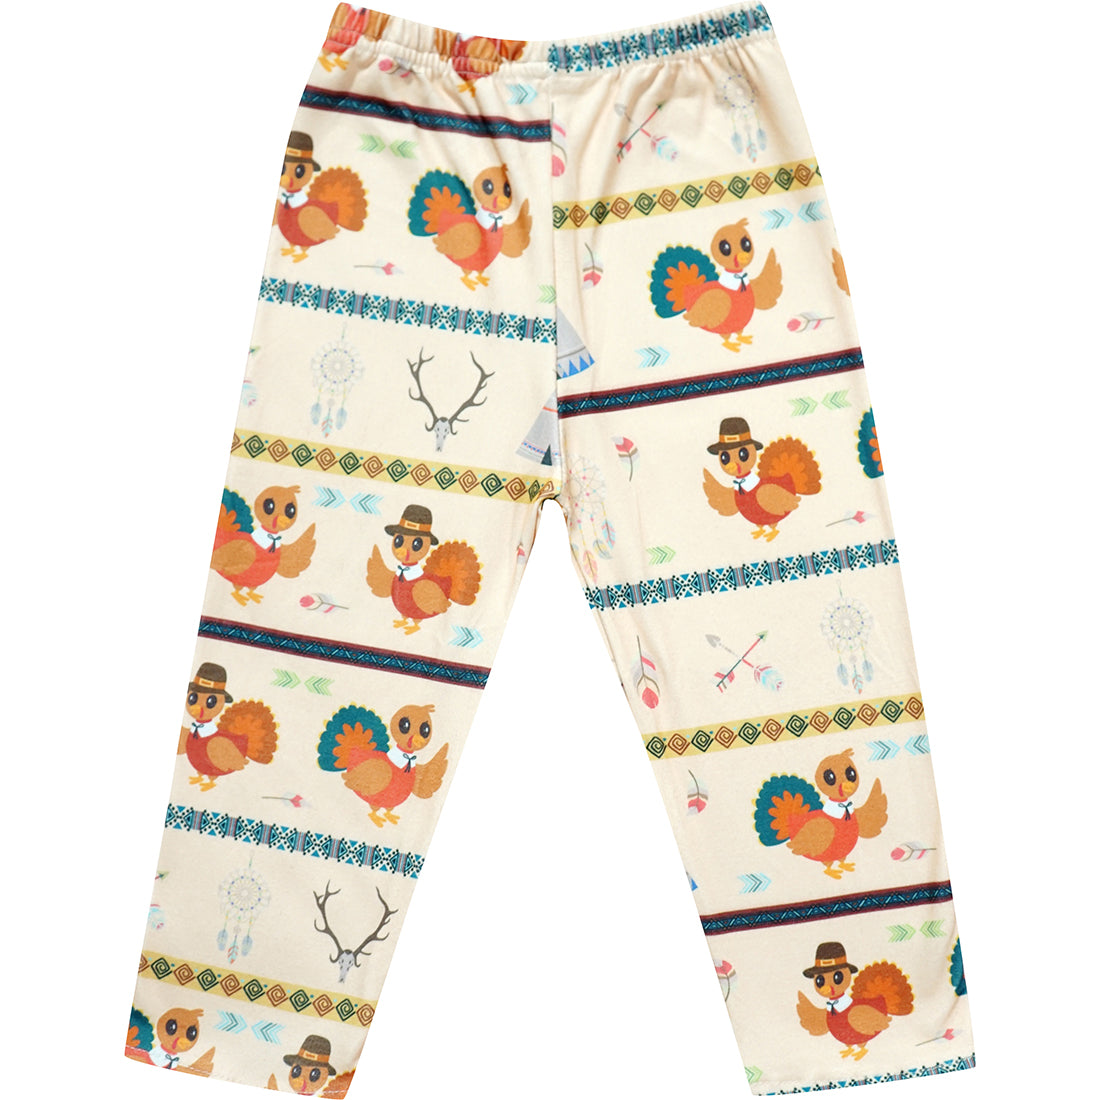 Baby Toddler Little Girls Happy Thanksgiving Turkey Aztec Tribal Scarf Ivory Brown Top Legging Scarf Outfit Set - Angeline Kids